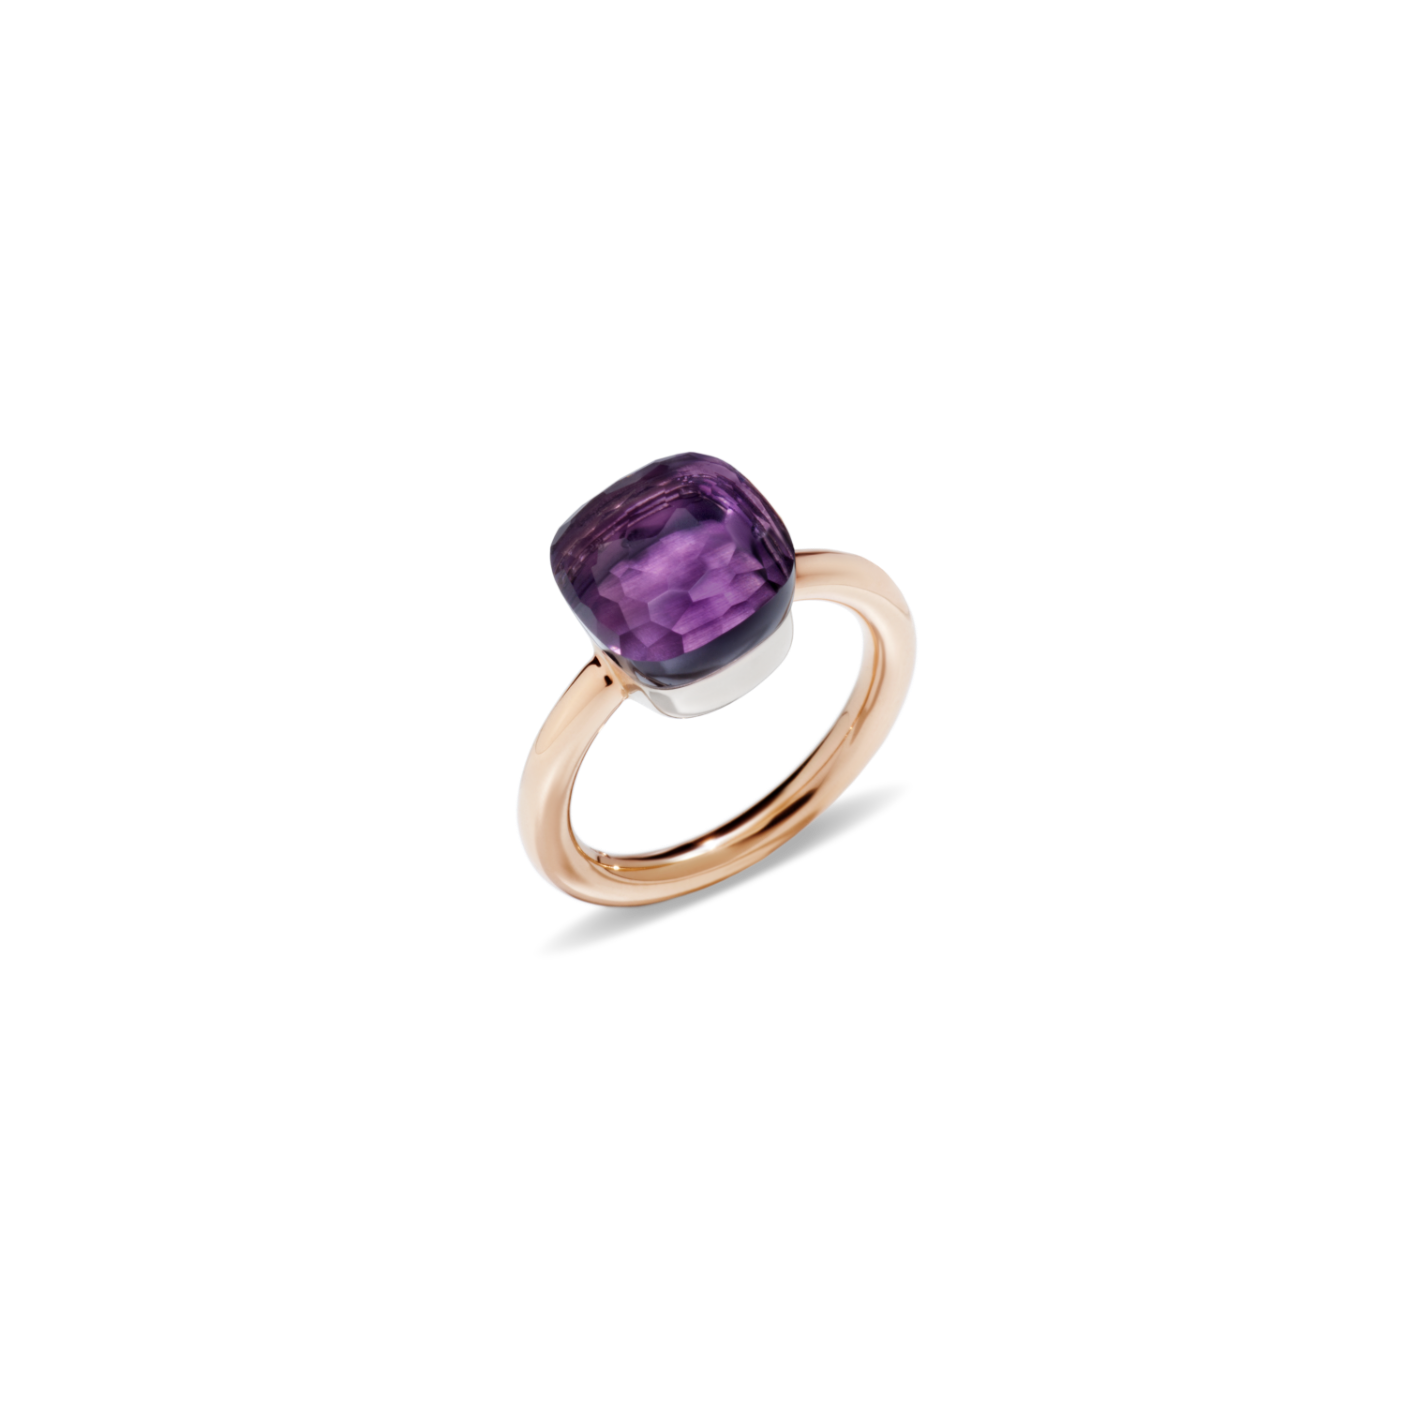 PAA1100_O6000_000OI_010_Pomellato_ring-nudo-classic-rose-gold-18kt-white-gold-18kt-amethyst.png